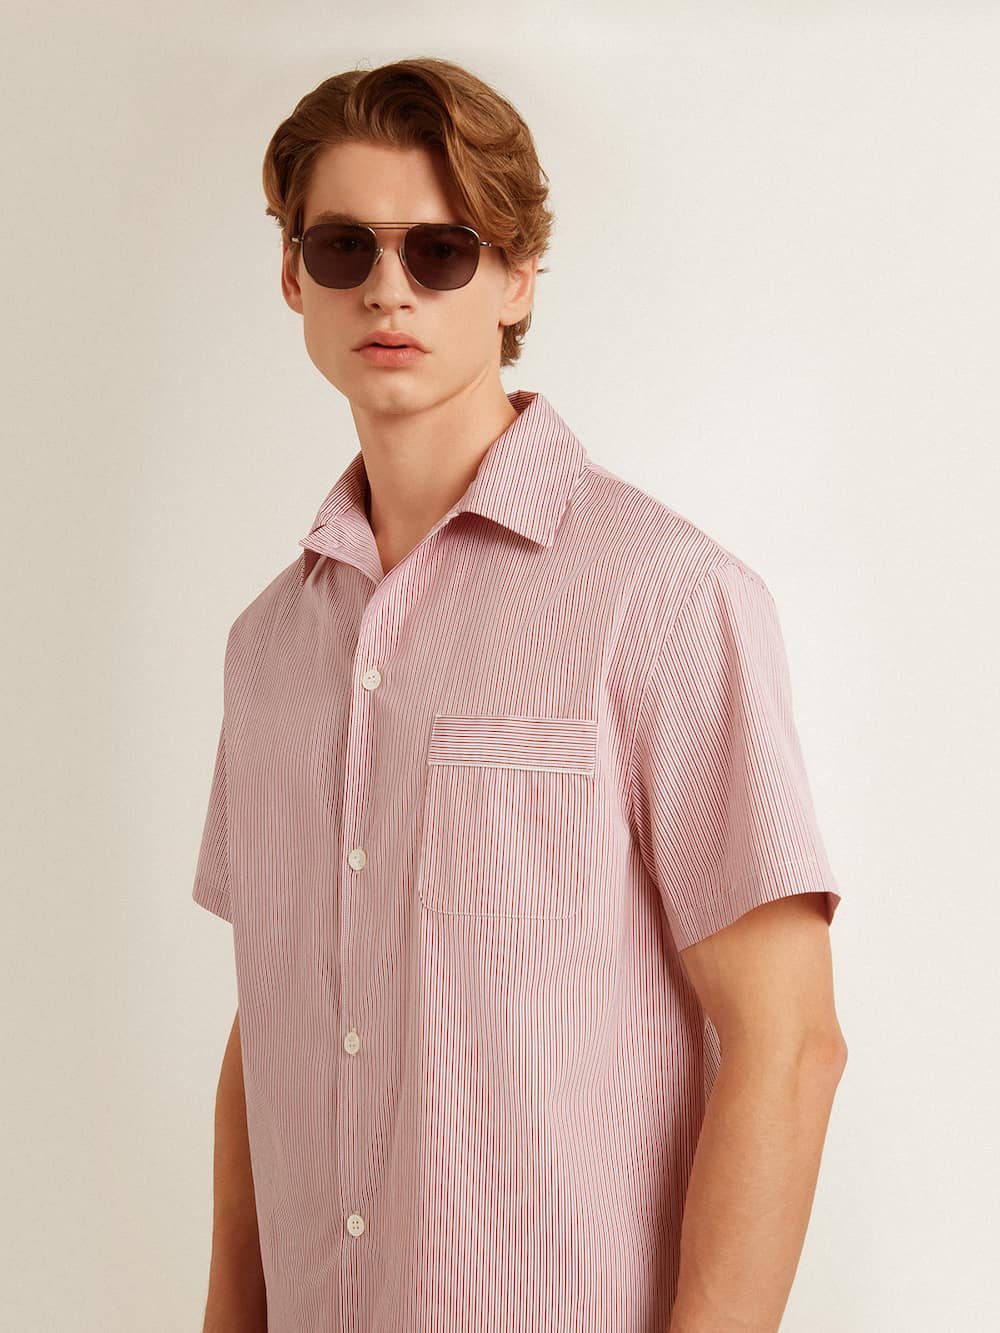 Golden Goose - Men's shirt in white and red striped cotton poplin in 